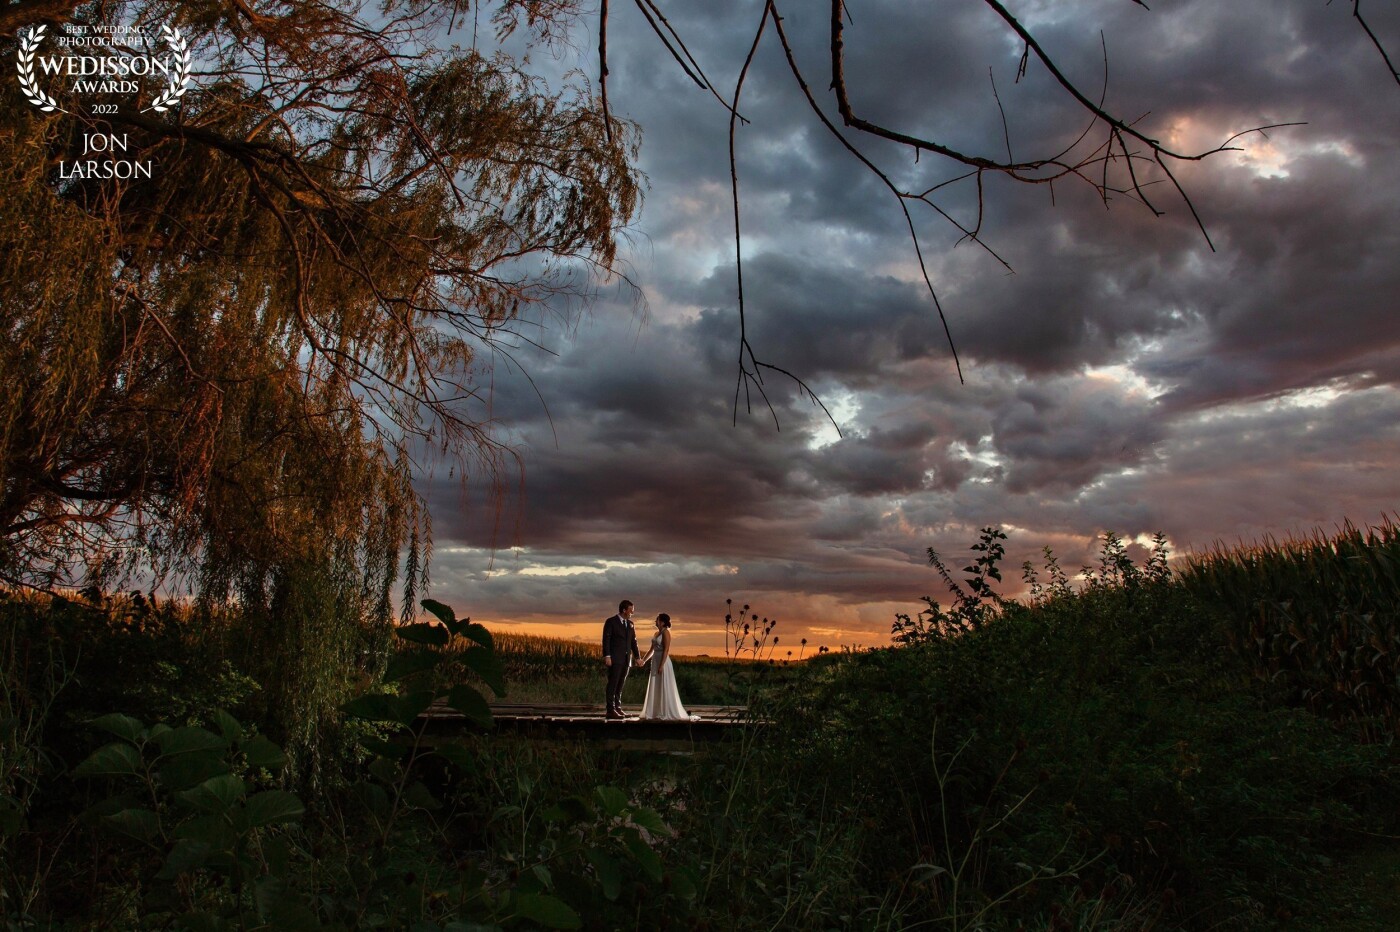 Alex and Sarah enjoying some quite time on the bridge out back. The sun was setting like I’ve never seen before! I was able to snatch up the bride and groom and whisk them into a fairytale setting.